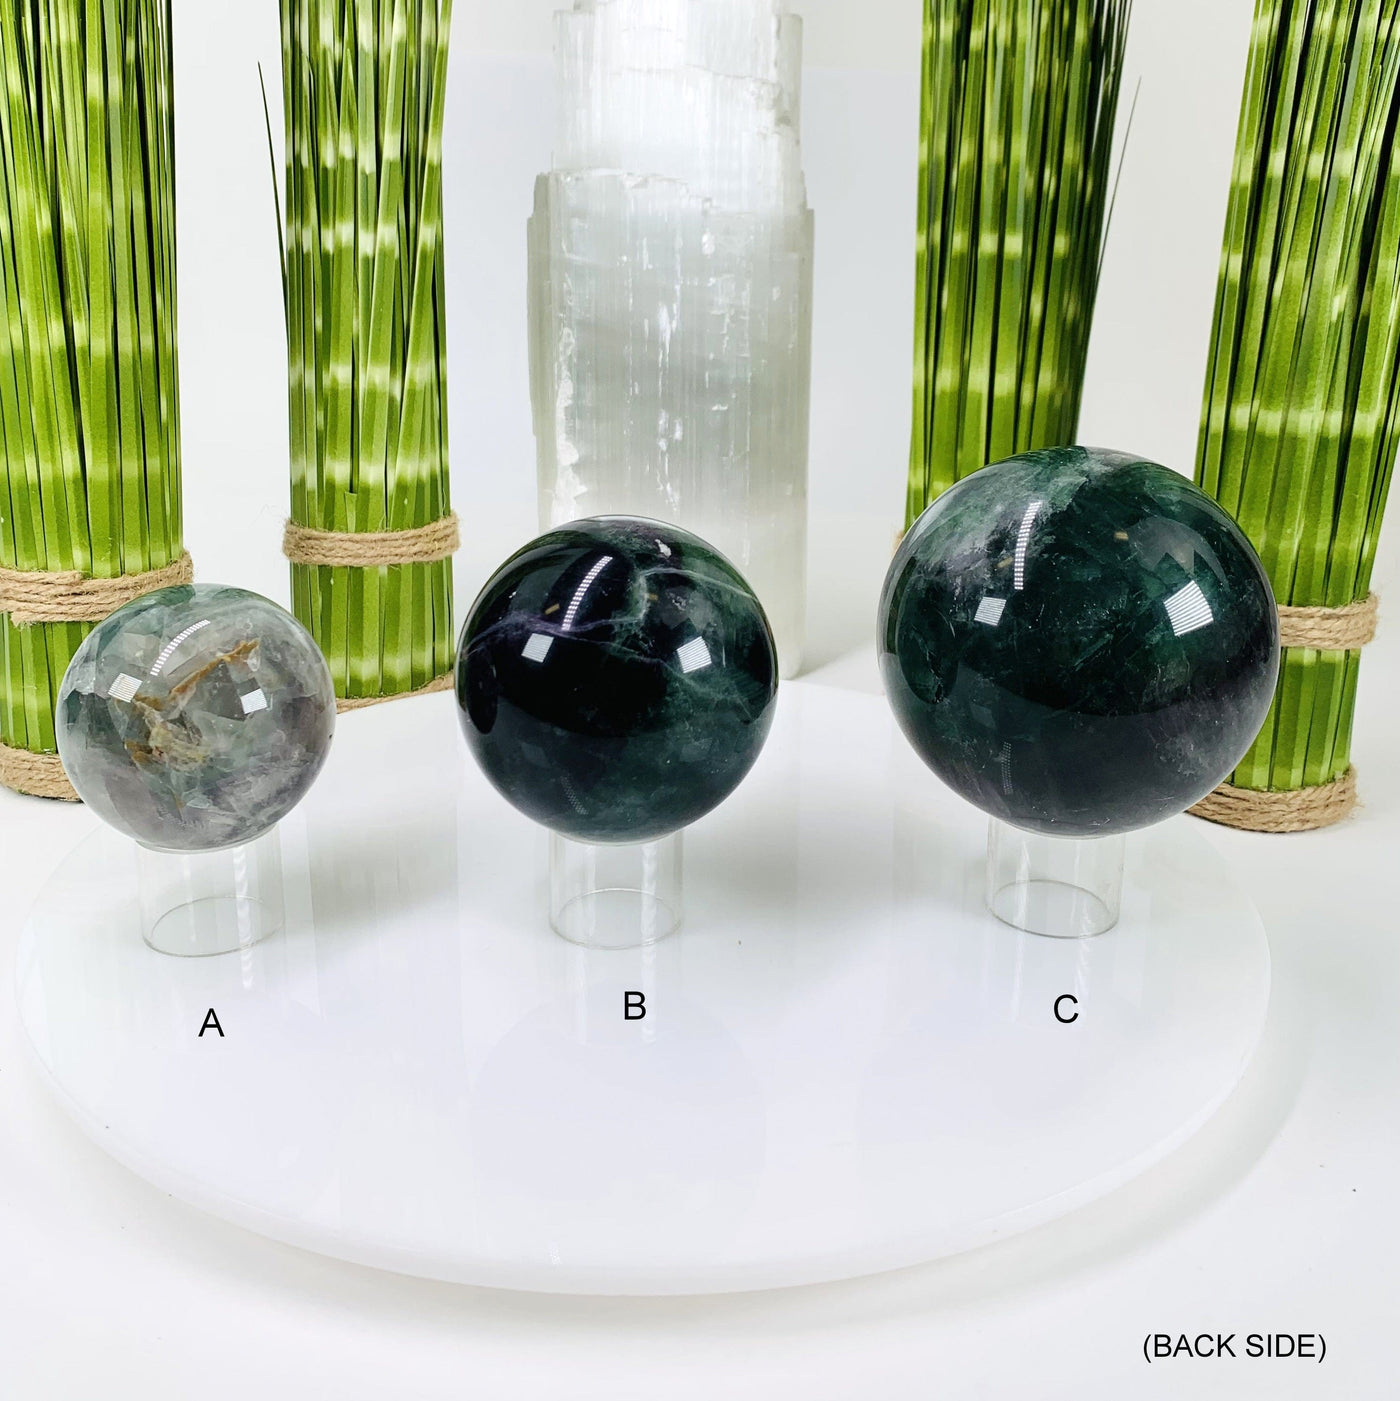 Back side Picture of all 3 rainbow fluorite spheres lined up next to each other, displayed on a white background.